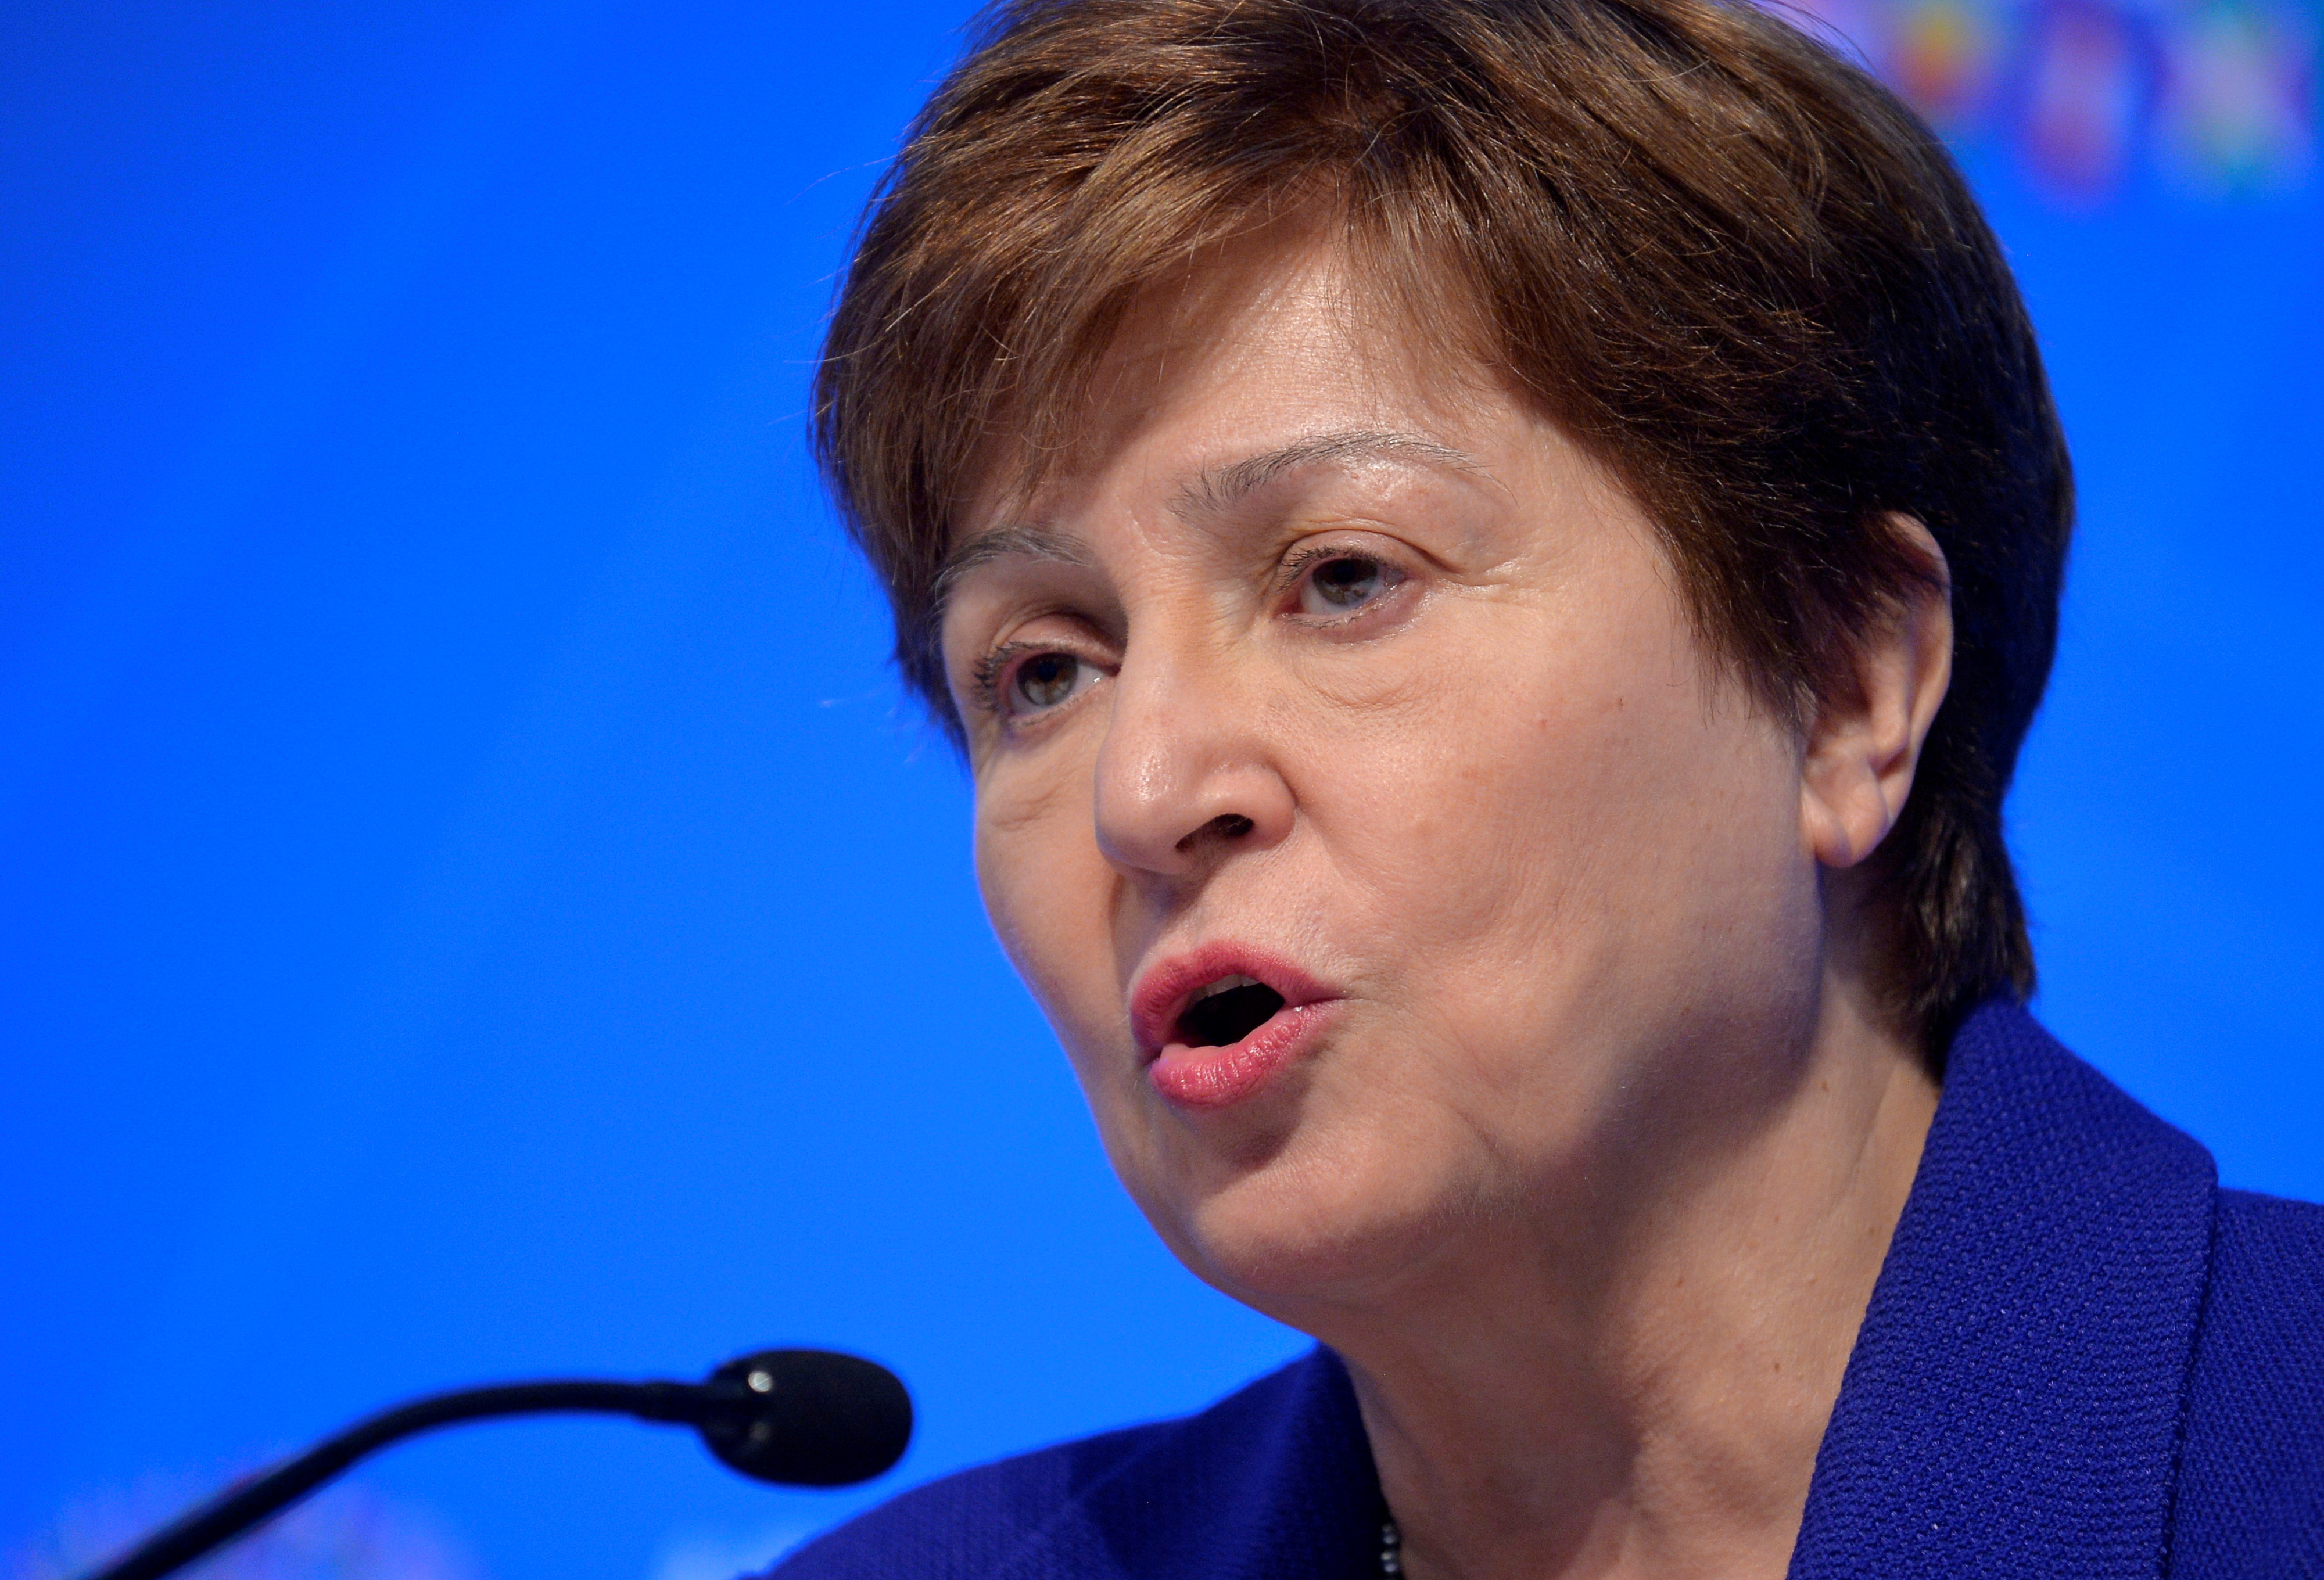 International Monetary Fund (IMF) Managing Director Kristalina Georgieva makes remarks during a closing news conference for the International Monetary Finance Committee (IMFC), during the IMF and World Bank's 2019 Annual Meetings of finance ministers and bank governors, in Washington, U.S., October 19, 2019.   REUTERS/Mike Theiler